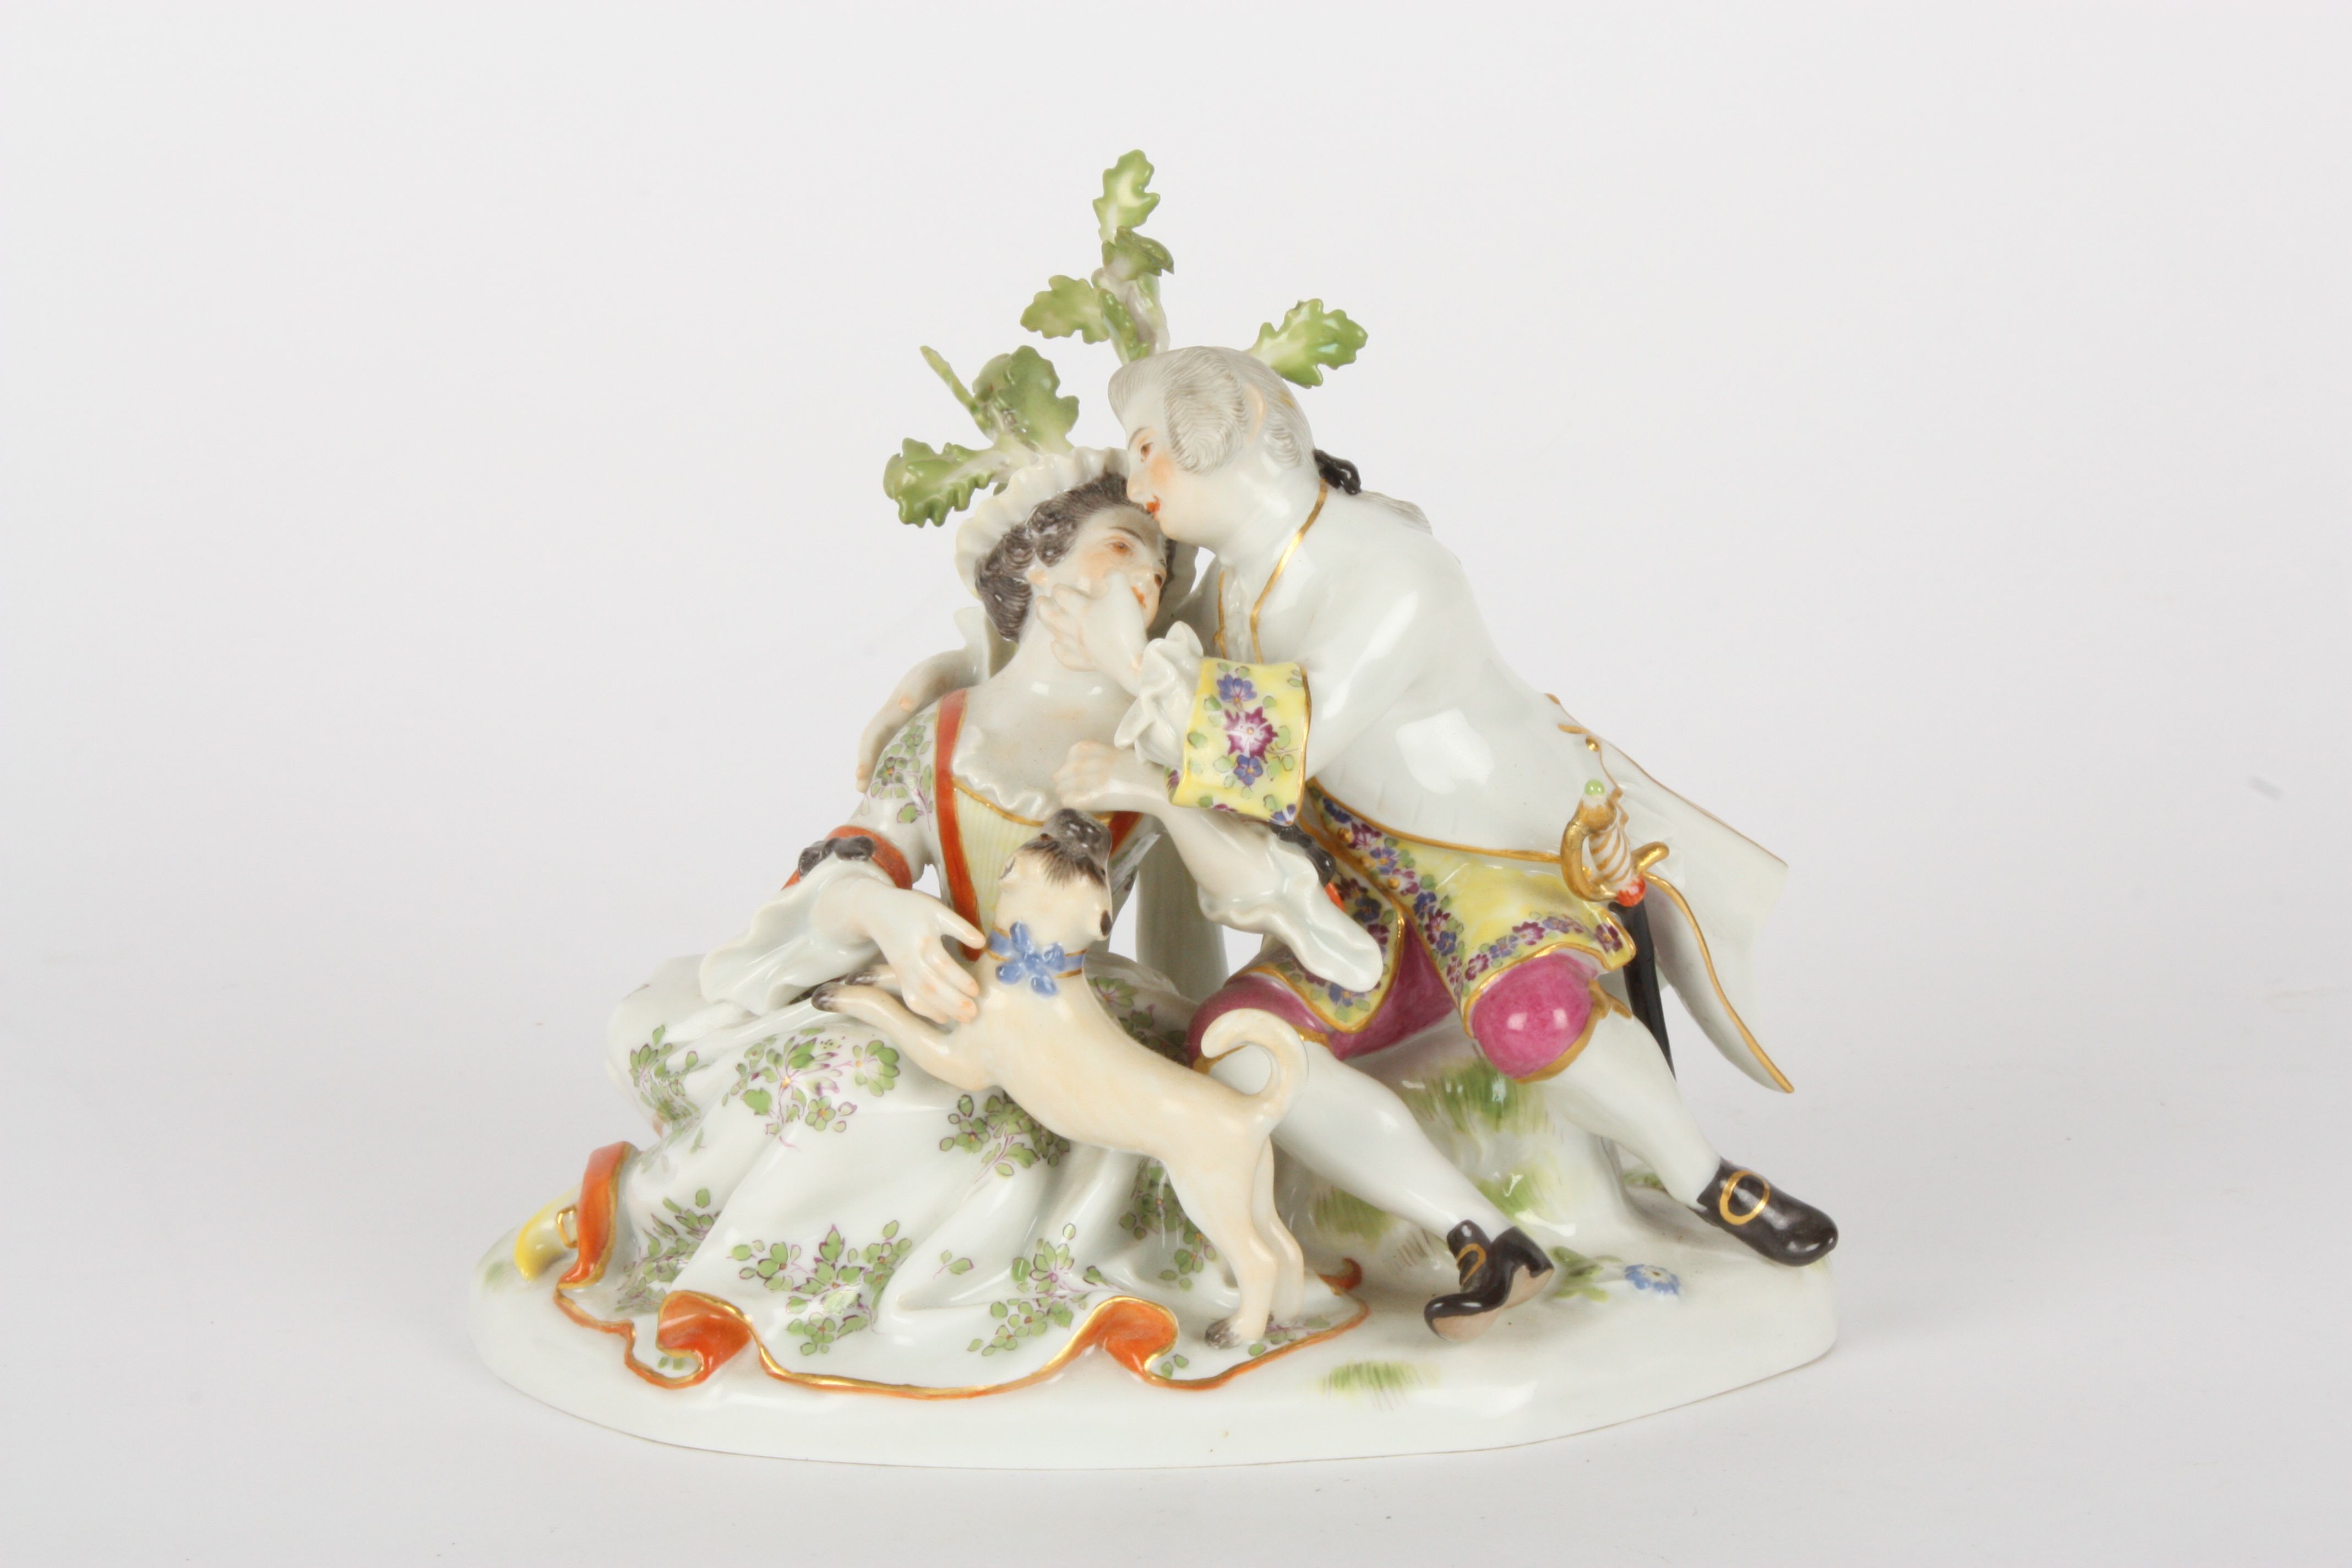 Late 20th century Meissen figure group, after Kaendler, courting couple seated, with a playful Pug